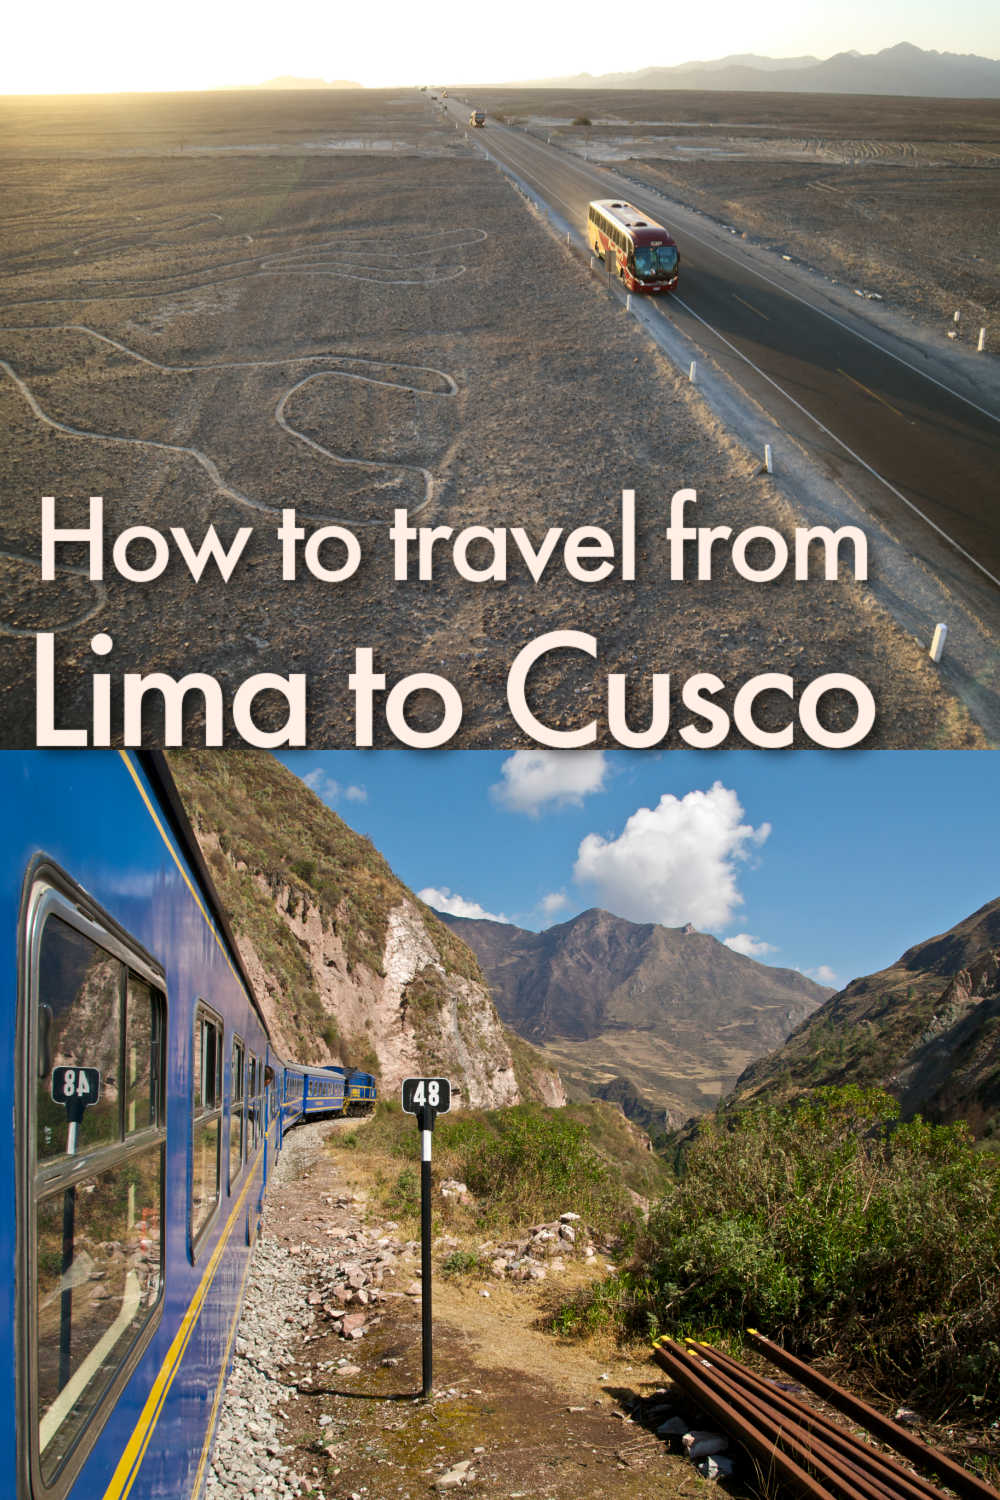 A practical guide to travel from Lima to Cusco by bus, train and flights.  How to buy the bus tickets, what is included in the price, how to plan your bus trip, and what to expect from the long bus ride.  Plus tips on how to get from Lima to Cusco by train (there is no direct train, btw) and how to plan the ultimate scenic ride from Lima to Cusco in Peru. 